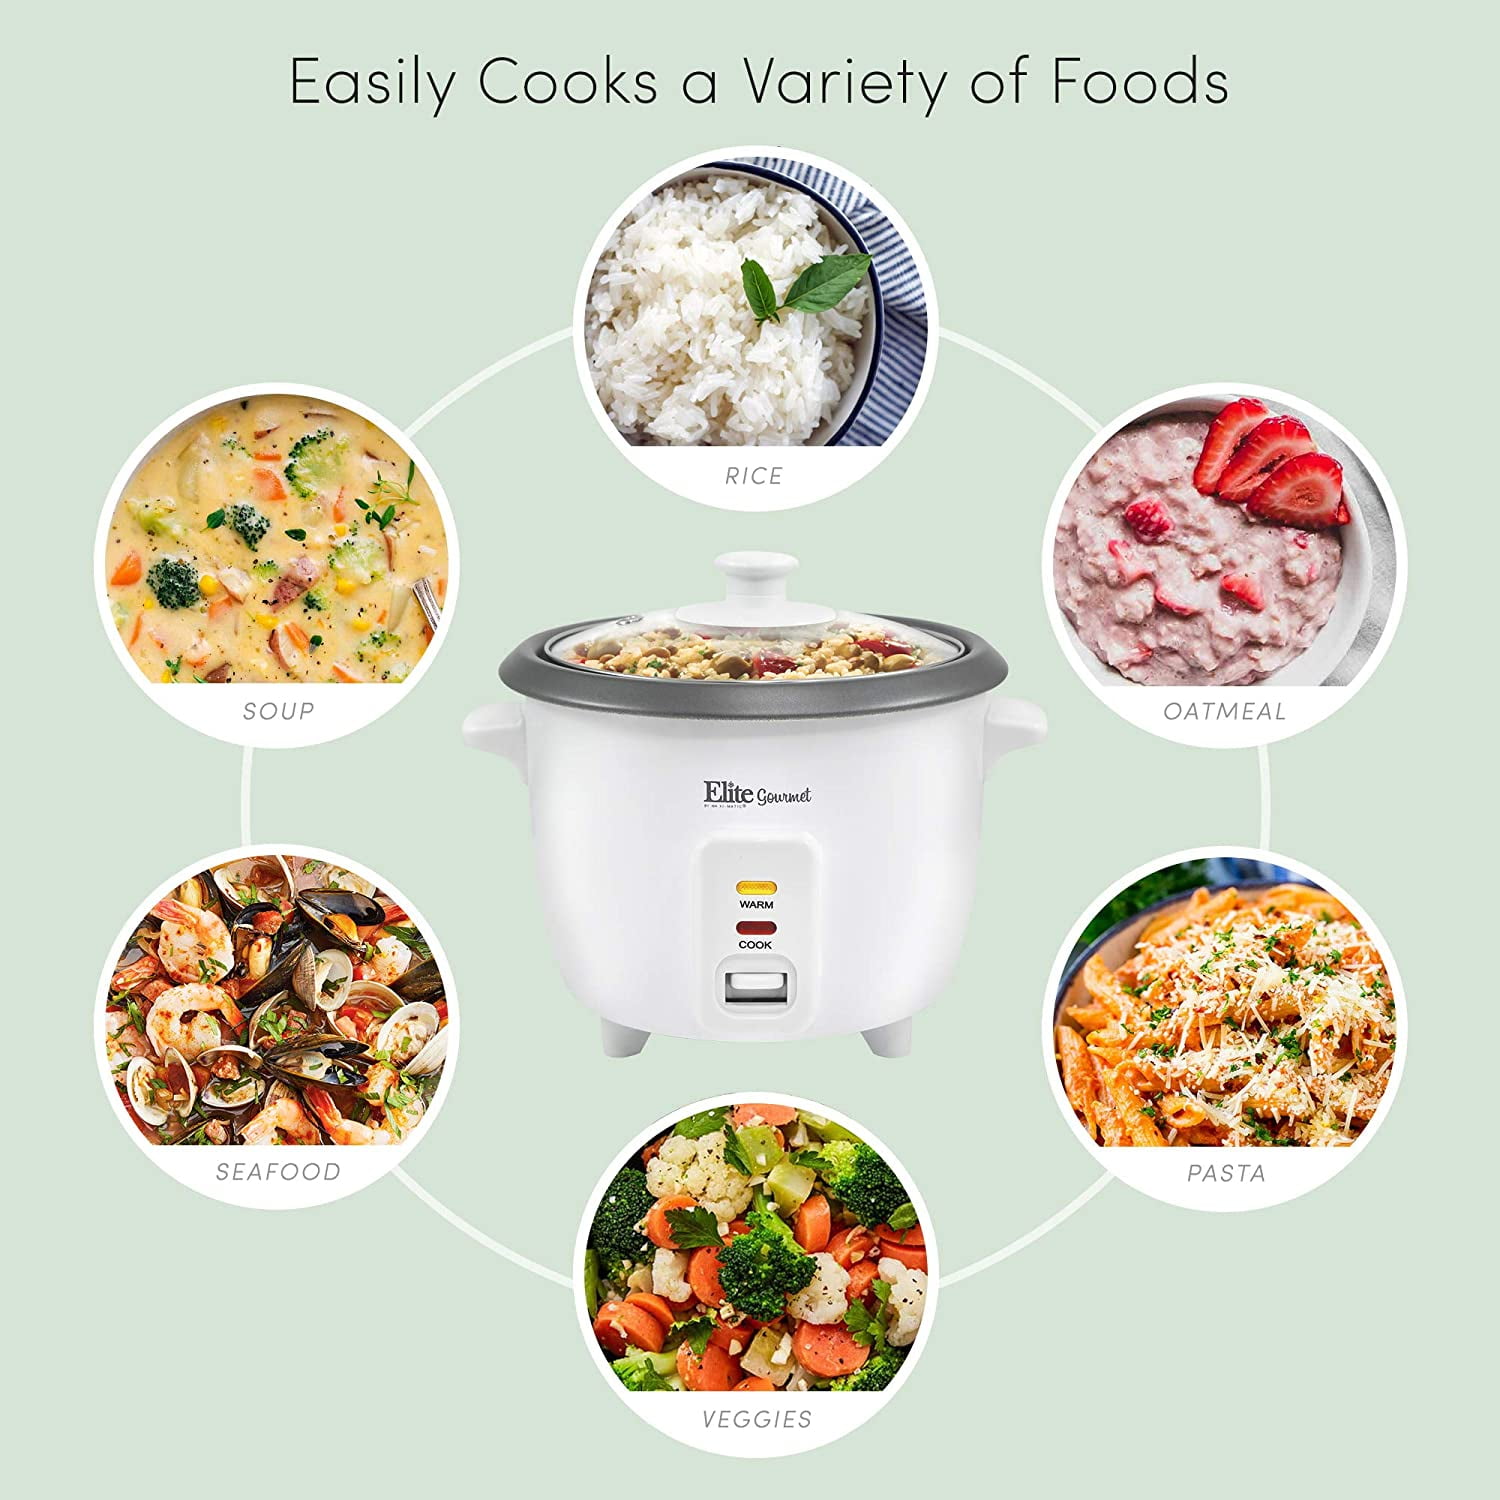 Maxi-Matic Elite Gourmet Rice Cooker With Steam Tray, White, 16